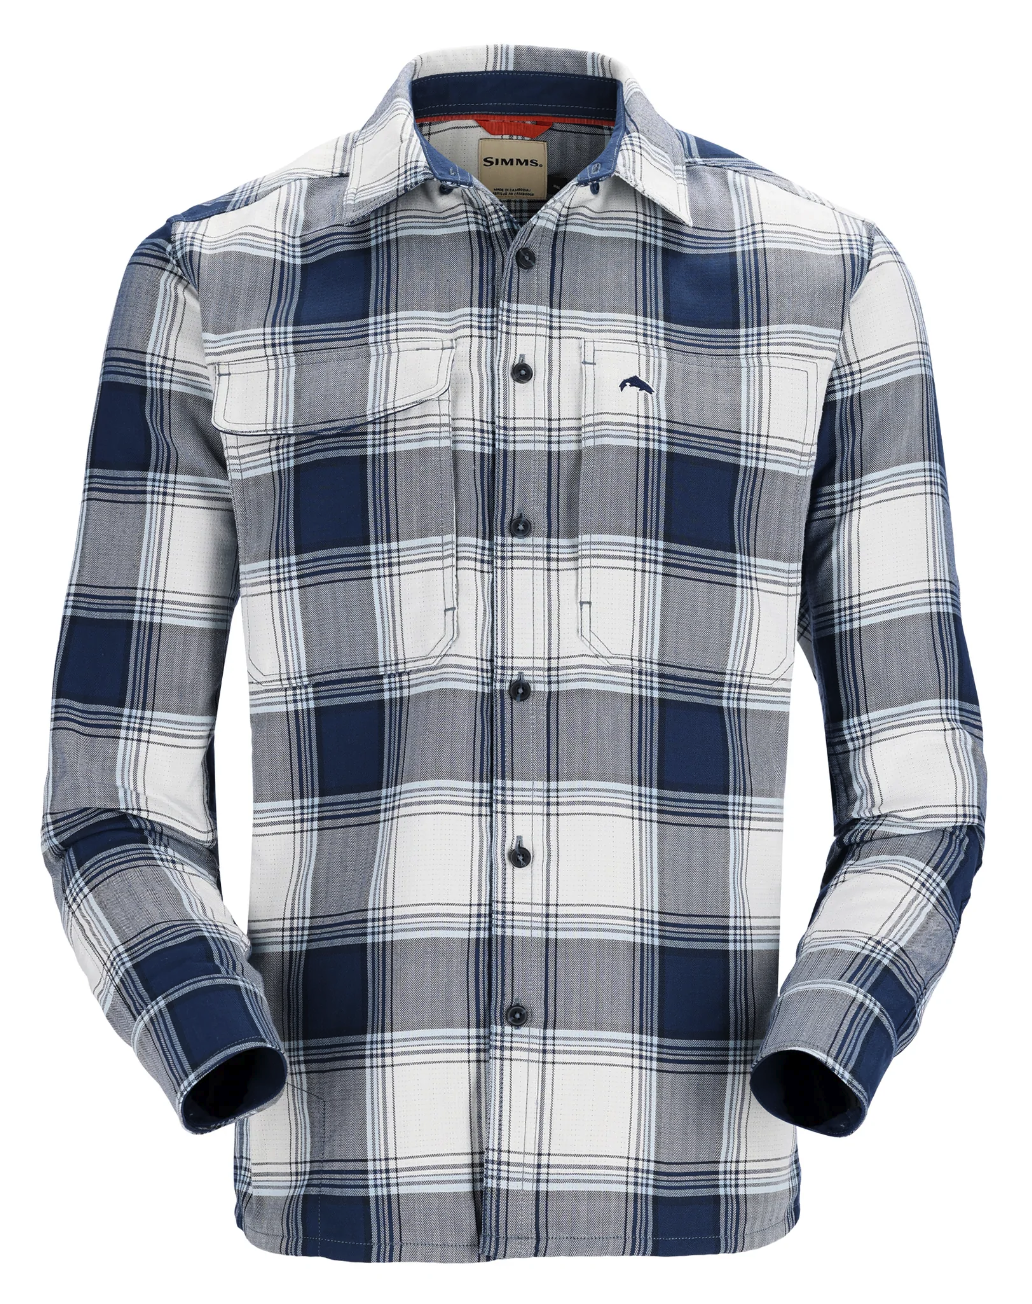 Simms Guide Flannel Shirt Navy